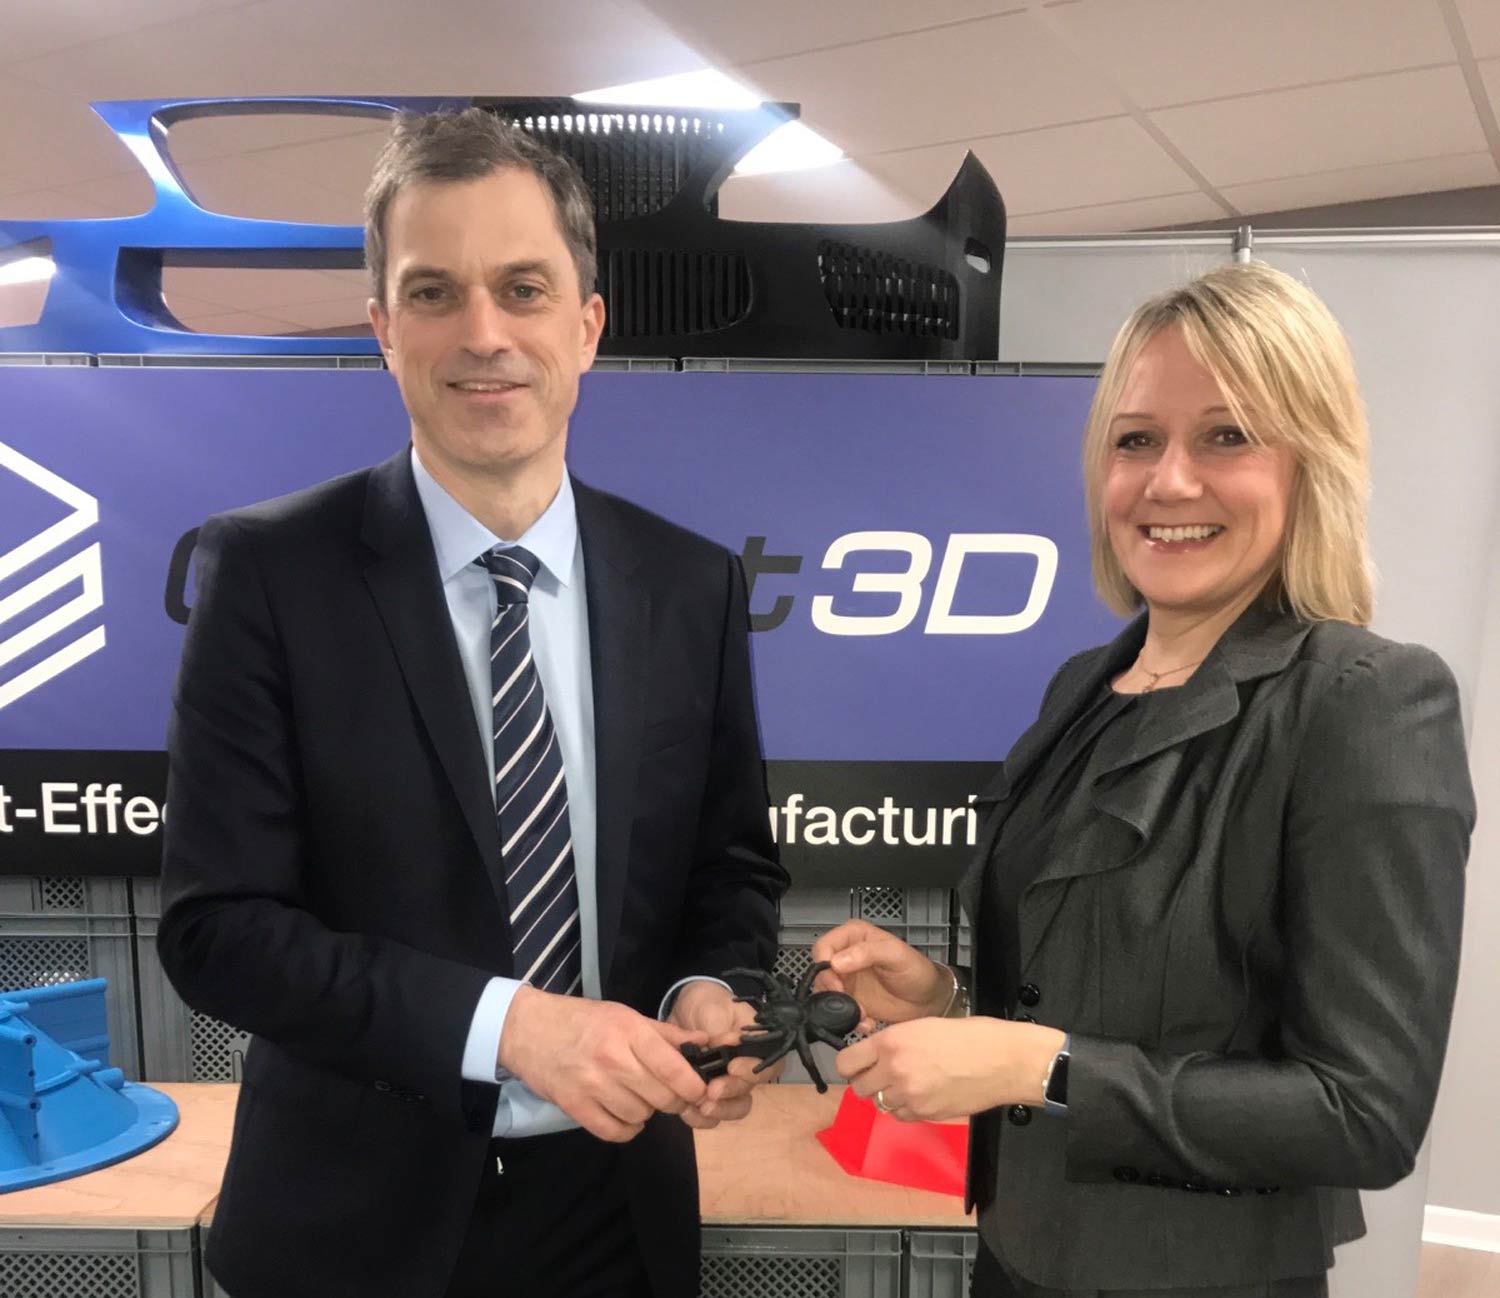 Julian Smith MP with Joanna Young, Managing Director of GoPrint3D